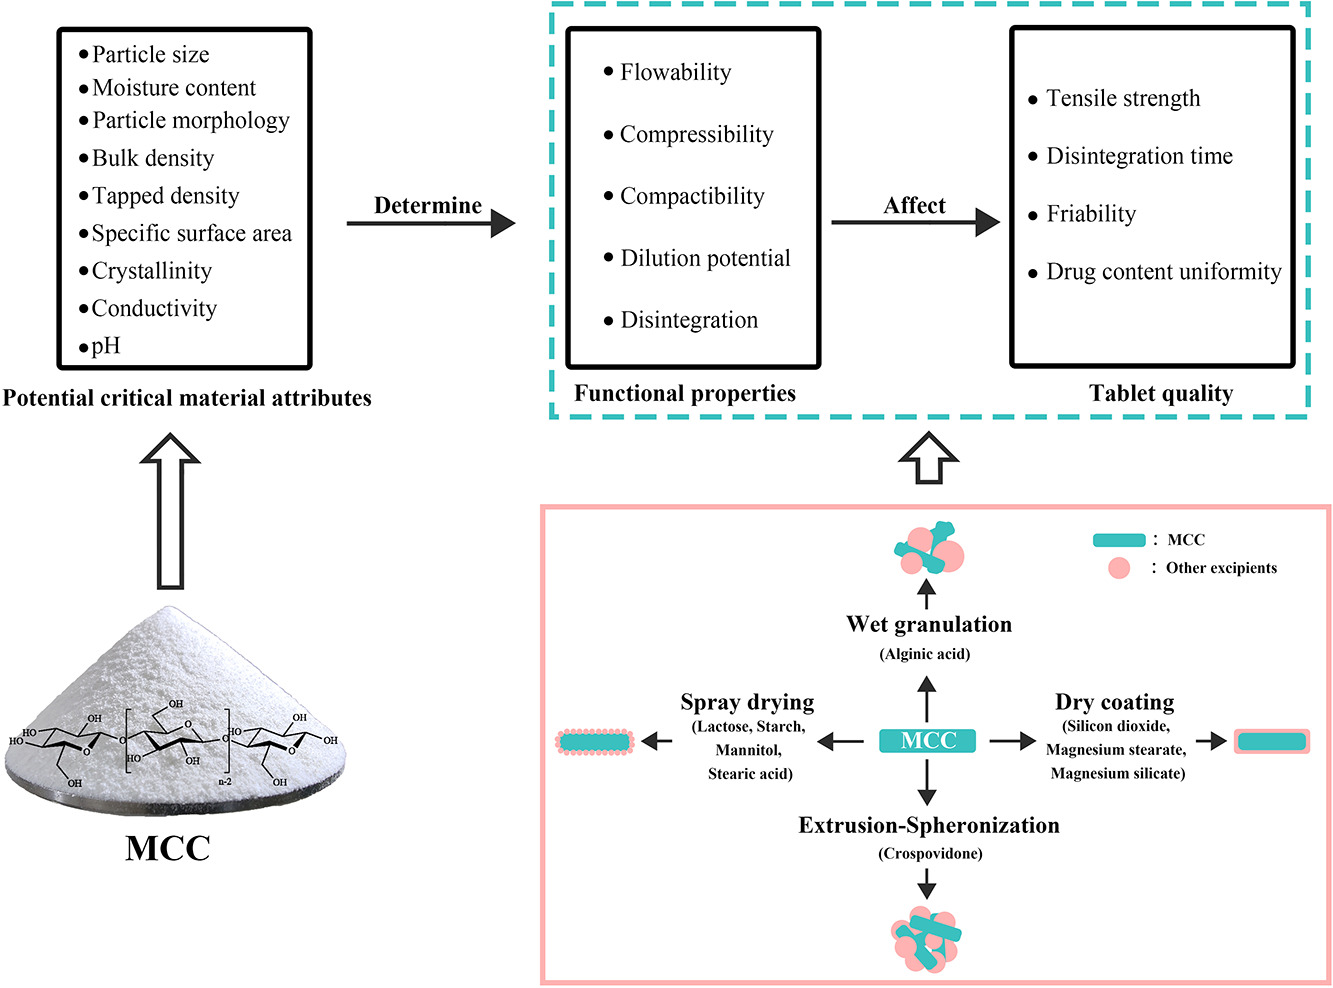 graphical abstract of An update on microcrystalline cellulose in direct compression: Functionality, critical material attributes, and co-processed excipients